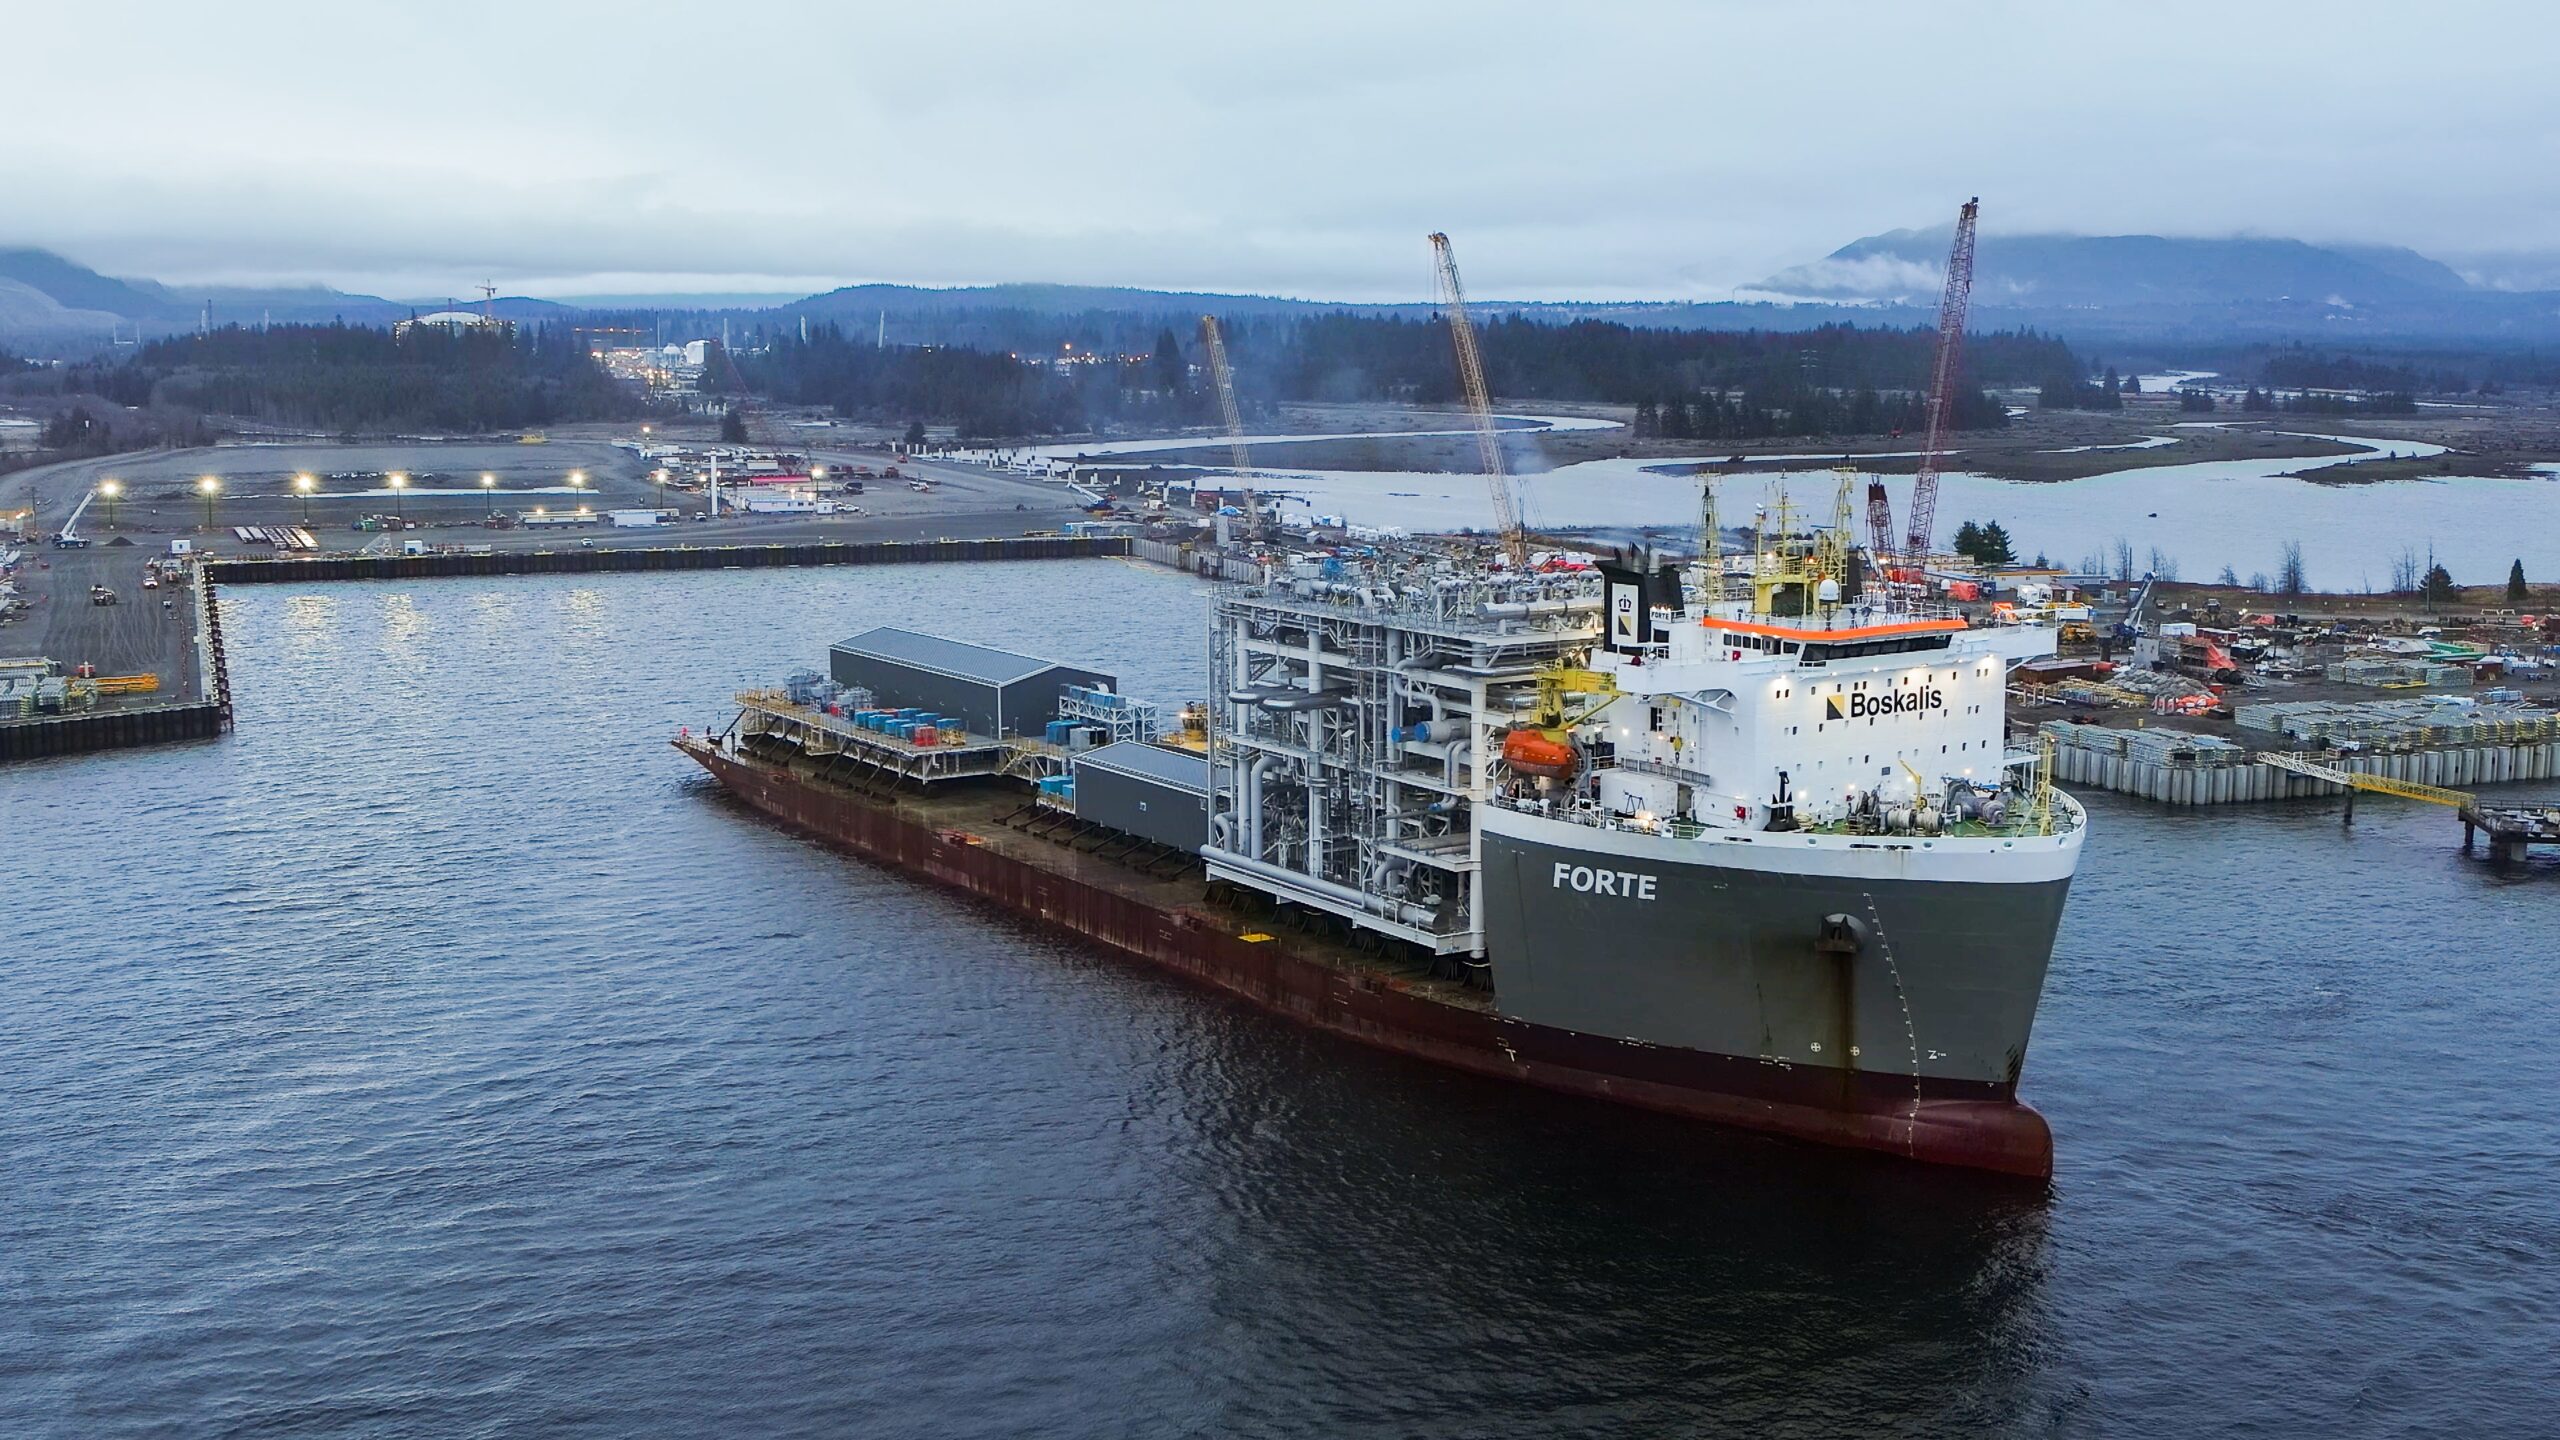 Arrival of large module represents next phase for LNG Canada project construction